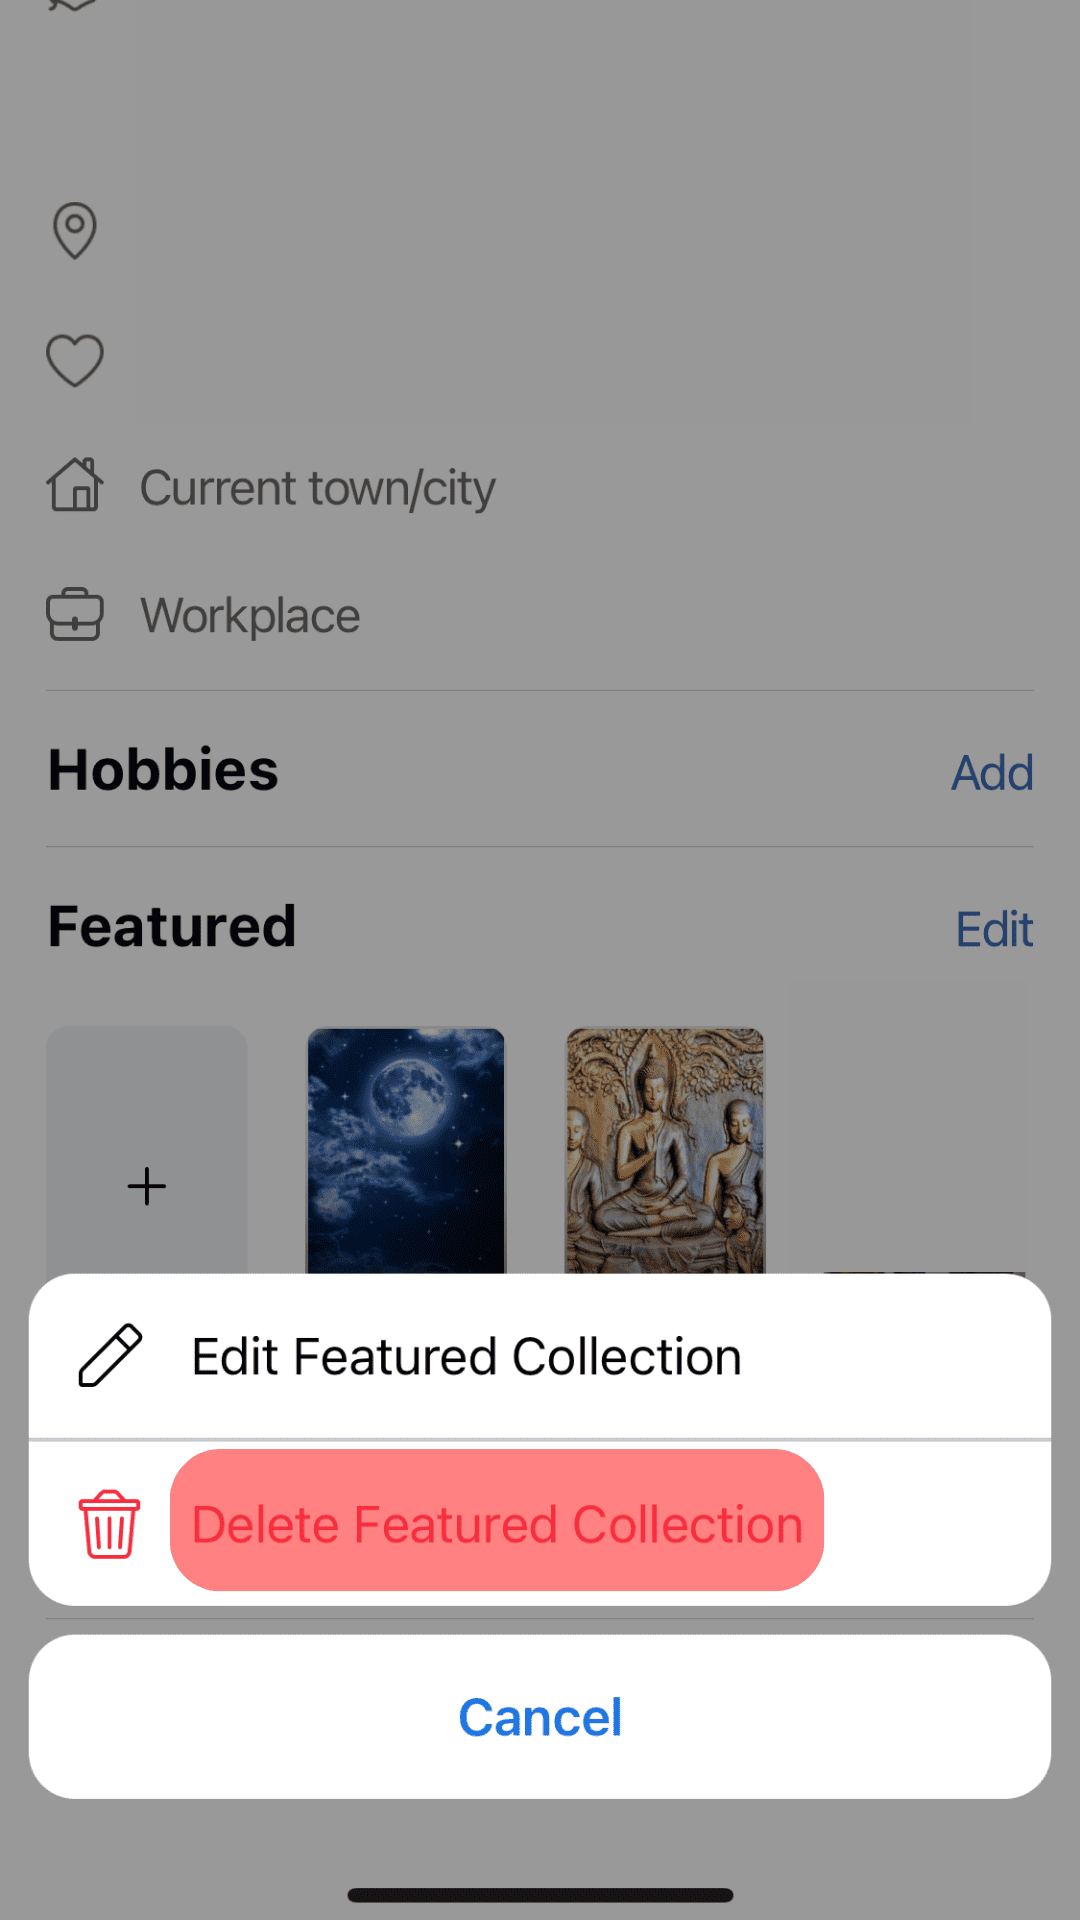 Select Delete Featured Collection.